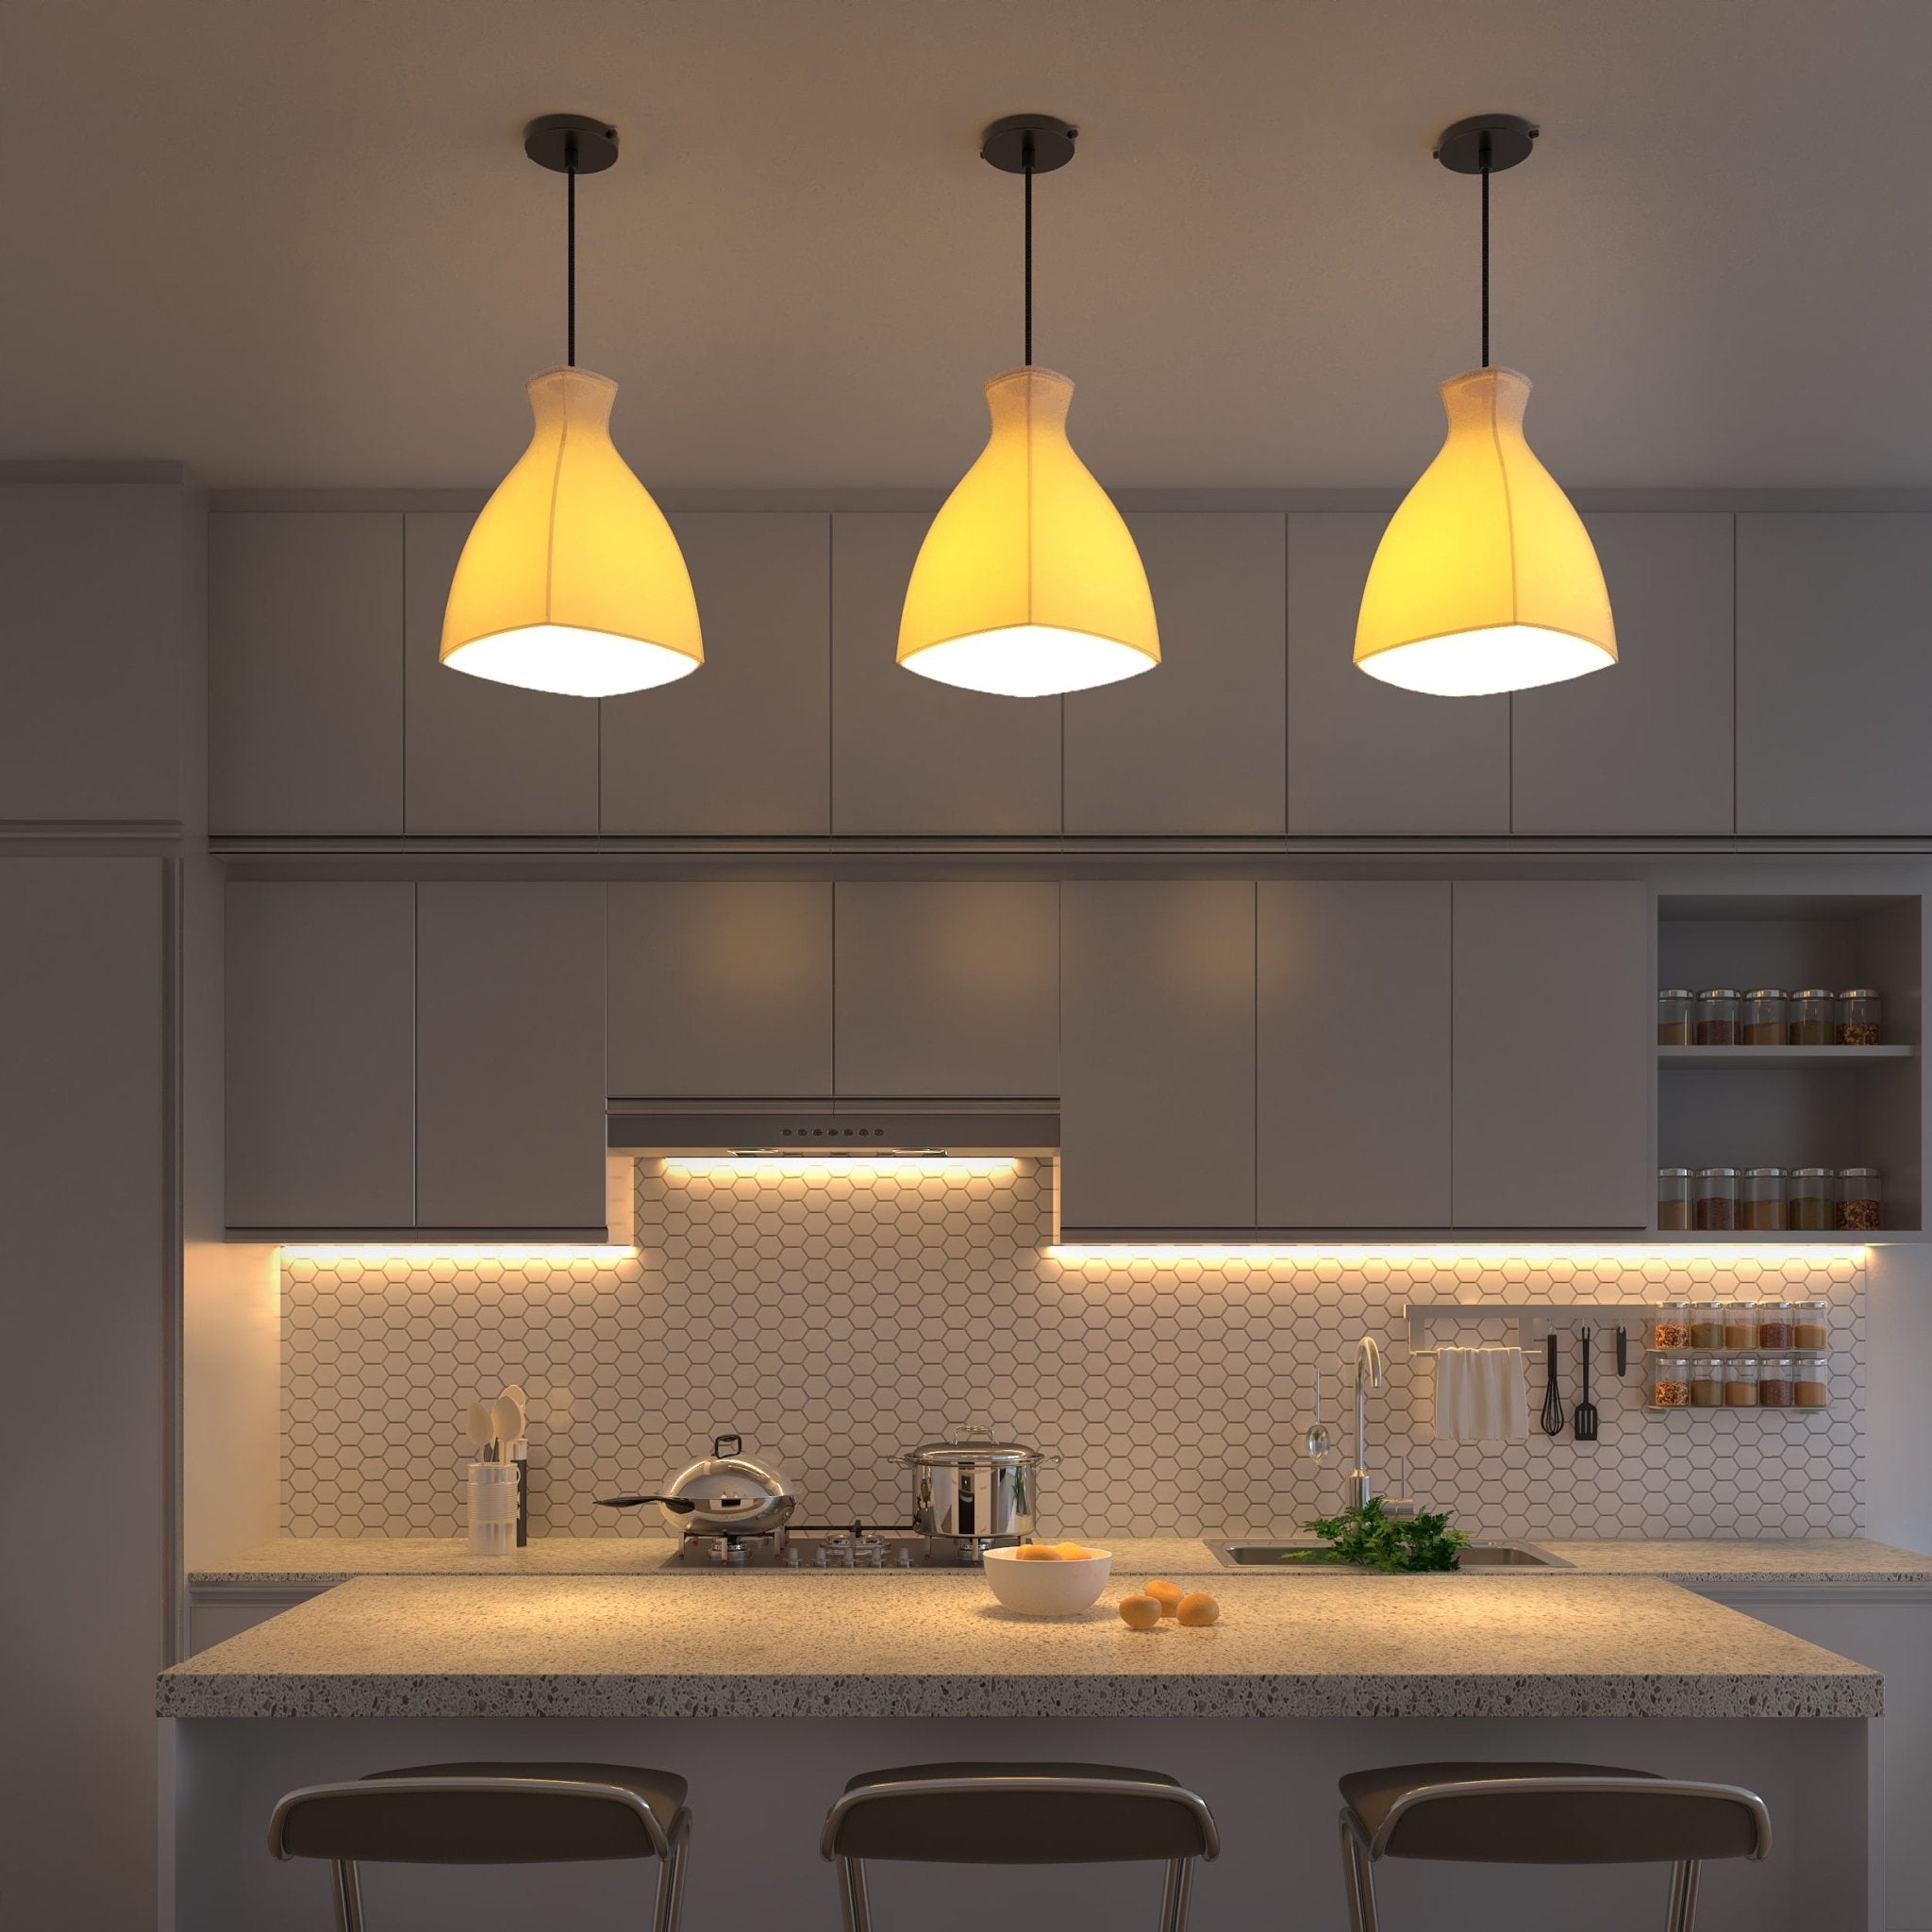 Why Choose Porcelain for Lighting? - The Bright Angle